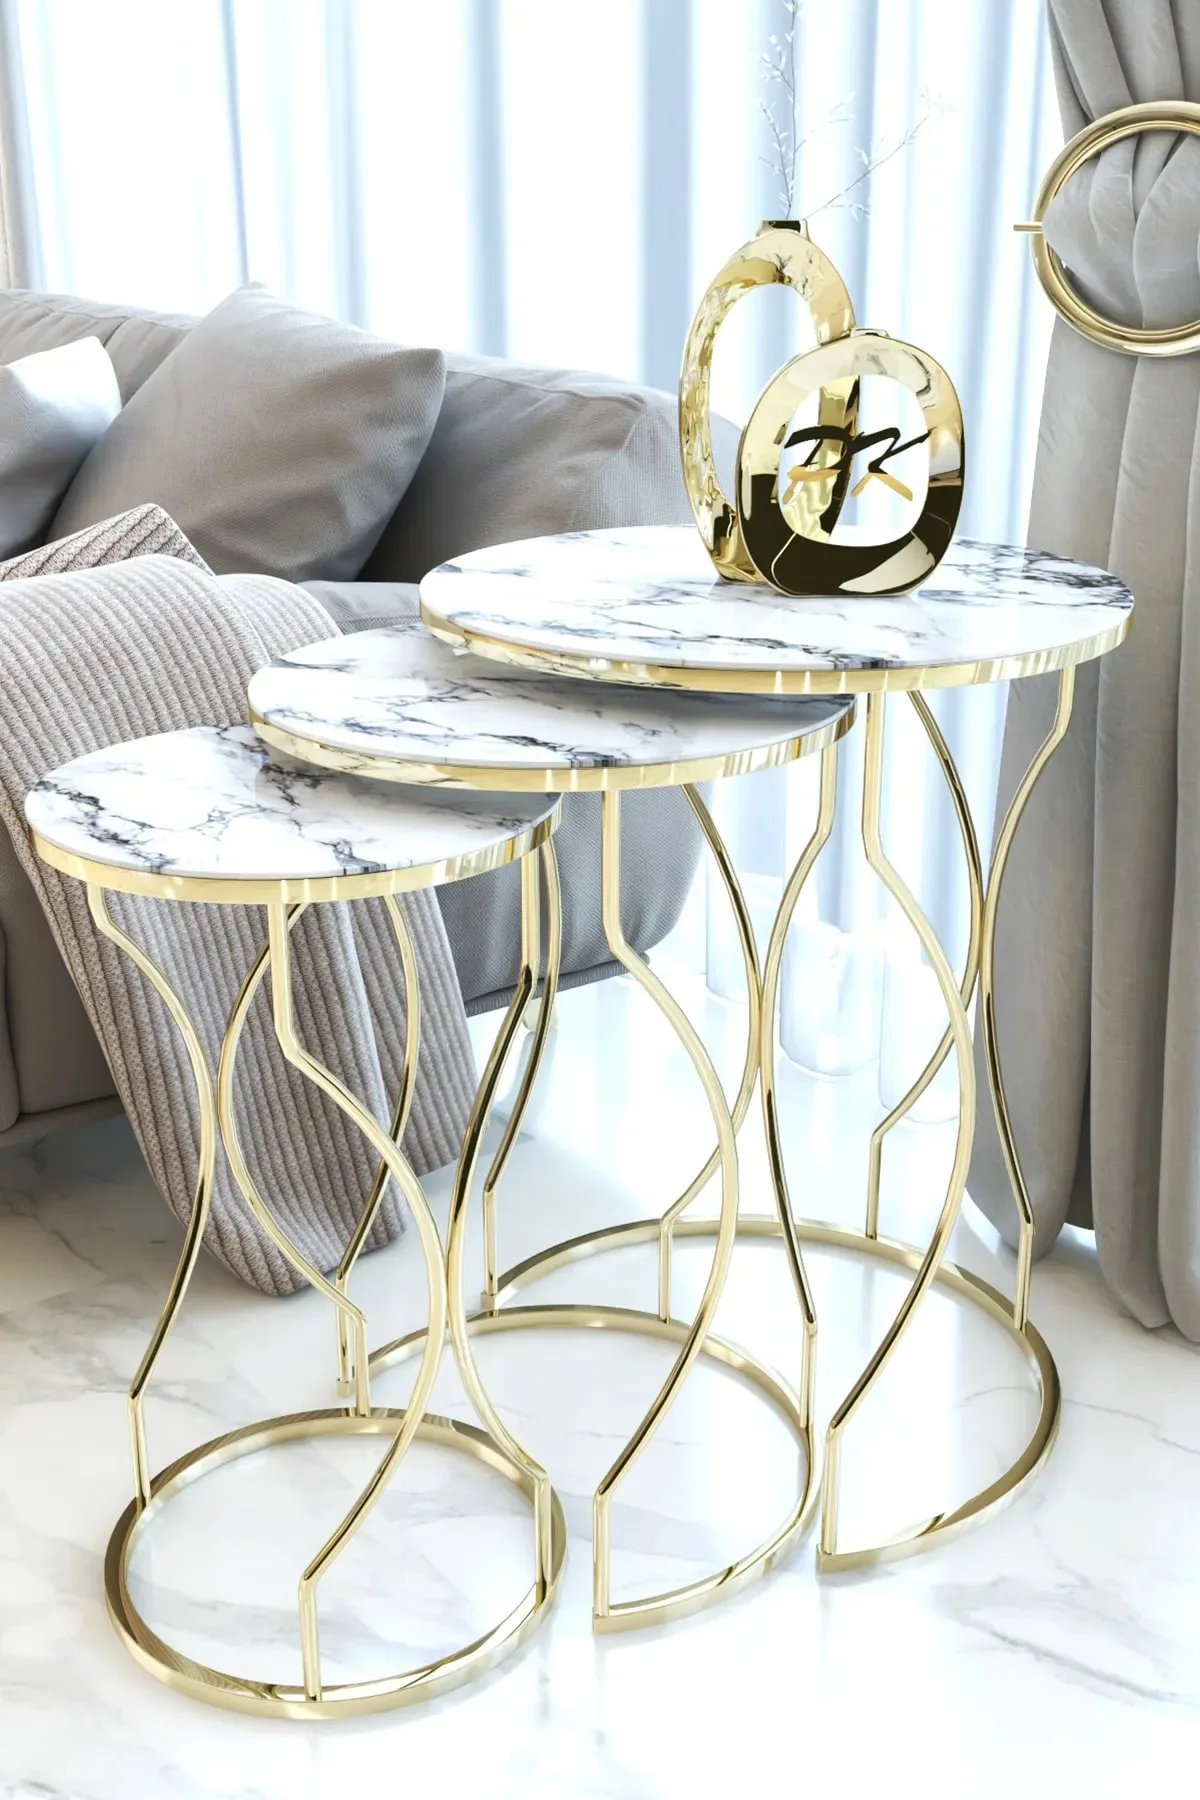 

Gold Metal Zigon Coffee Table Unbreakable Black Glass 3 PCs Nordic Side Coffee Table Tea Coffee Service Table Round Living Room